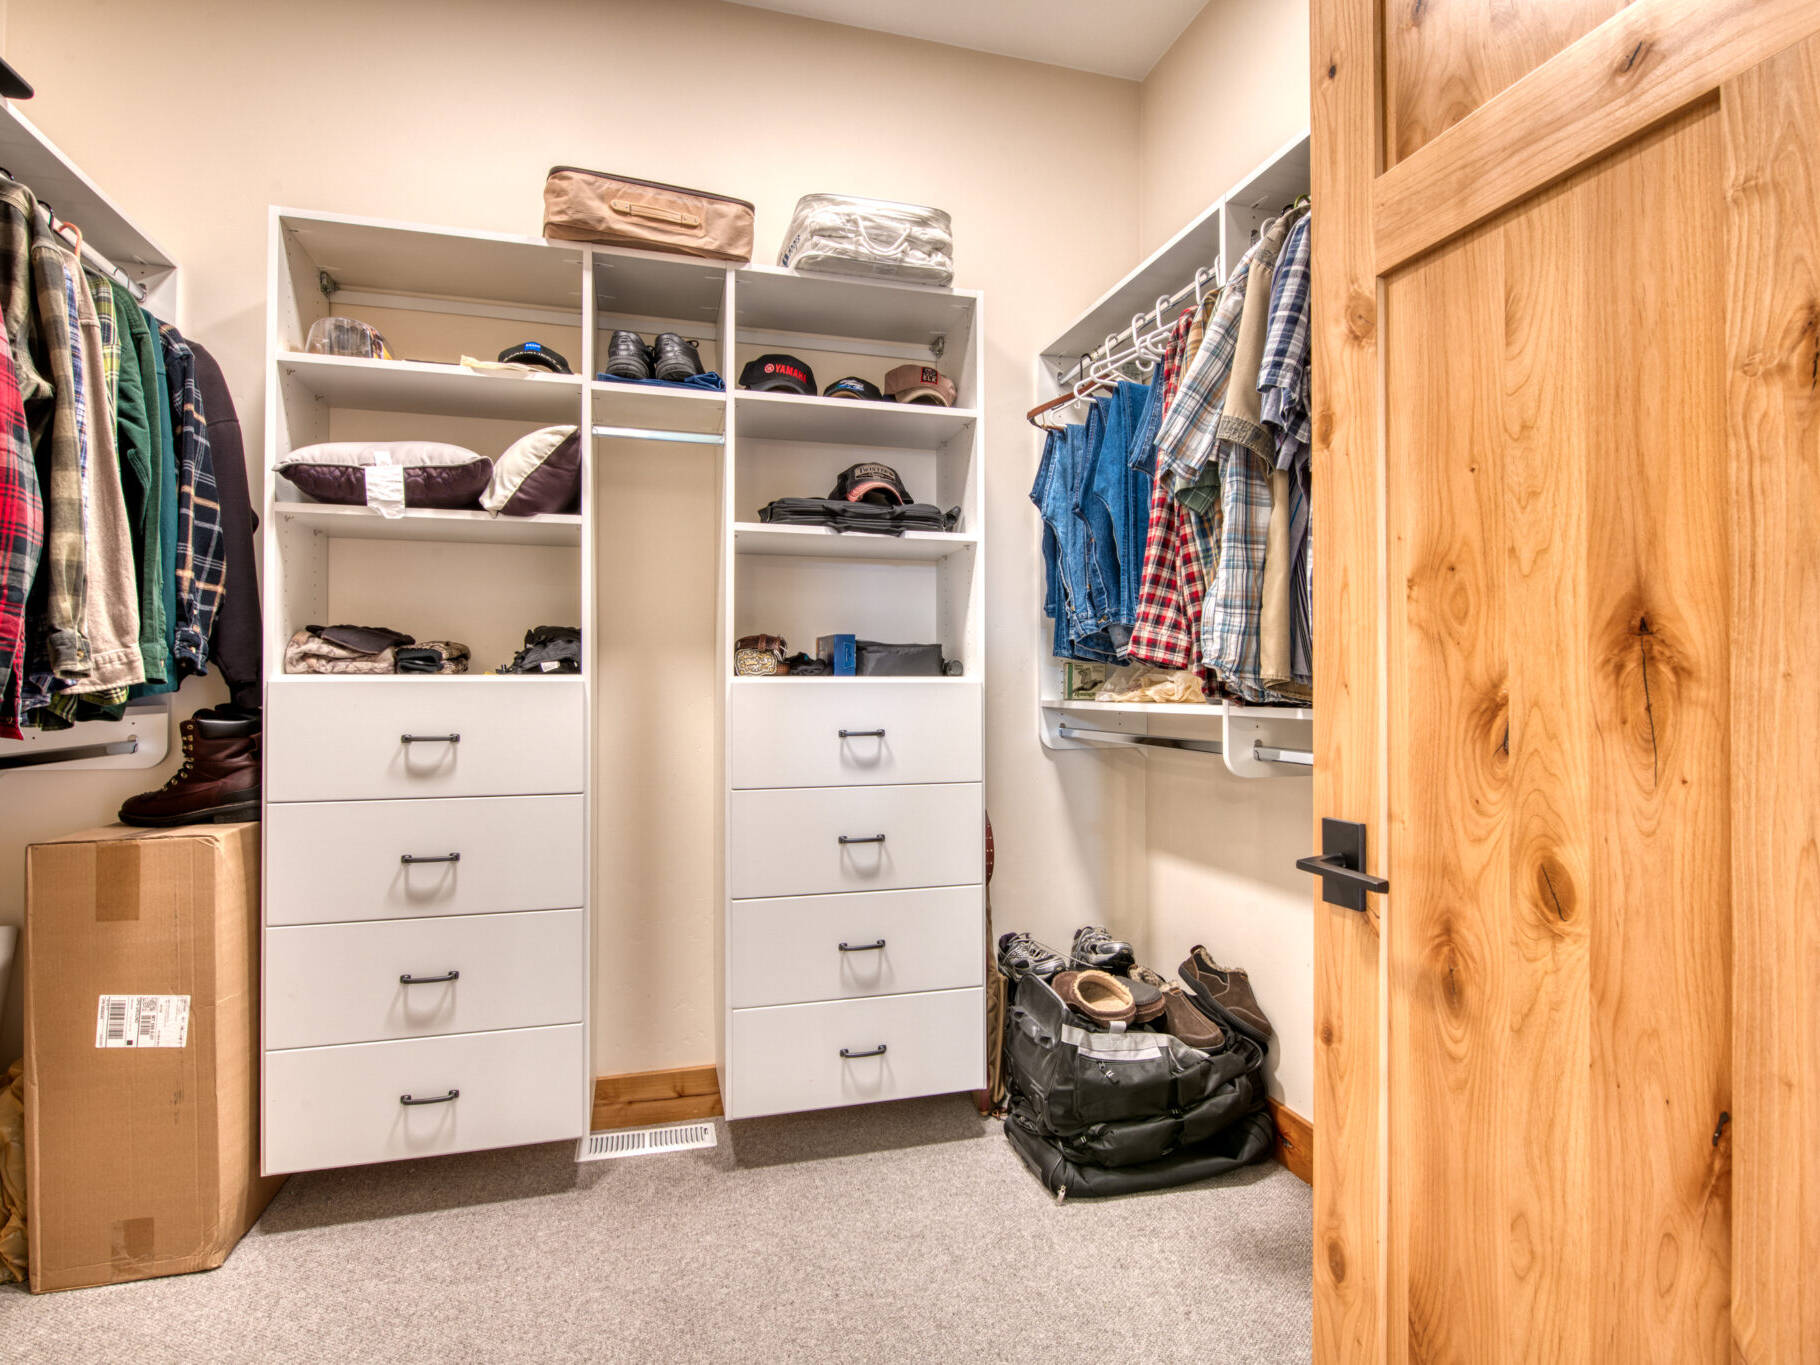 Closet shelving system in a custom home built by Big Sky Builders in Florence, MT